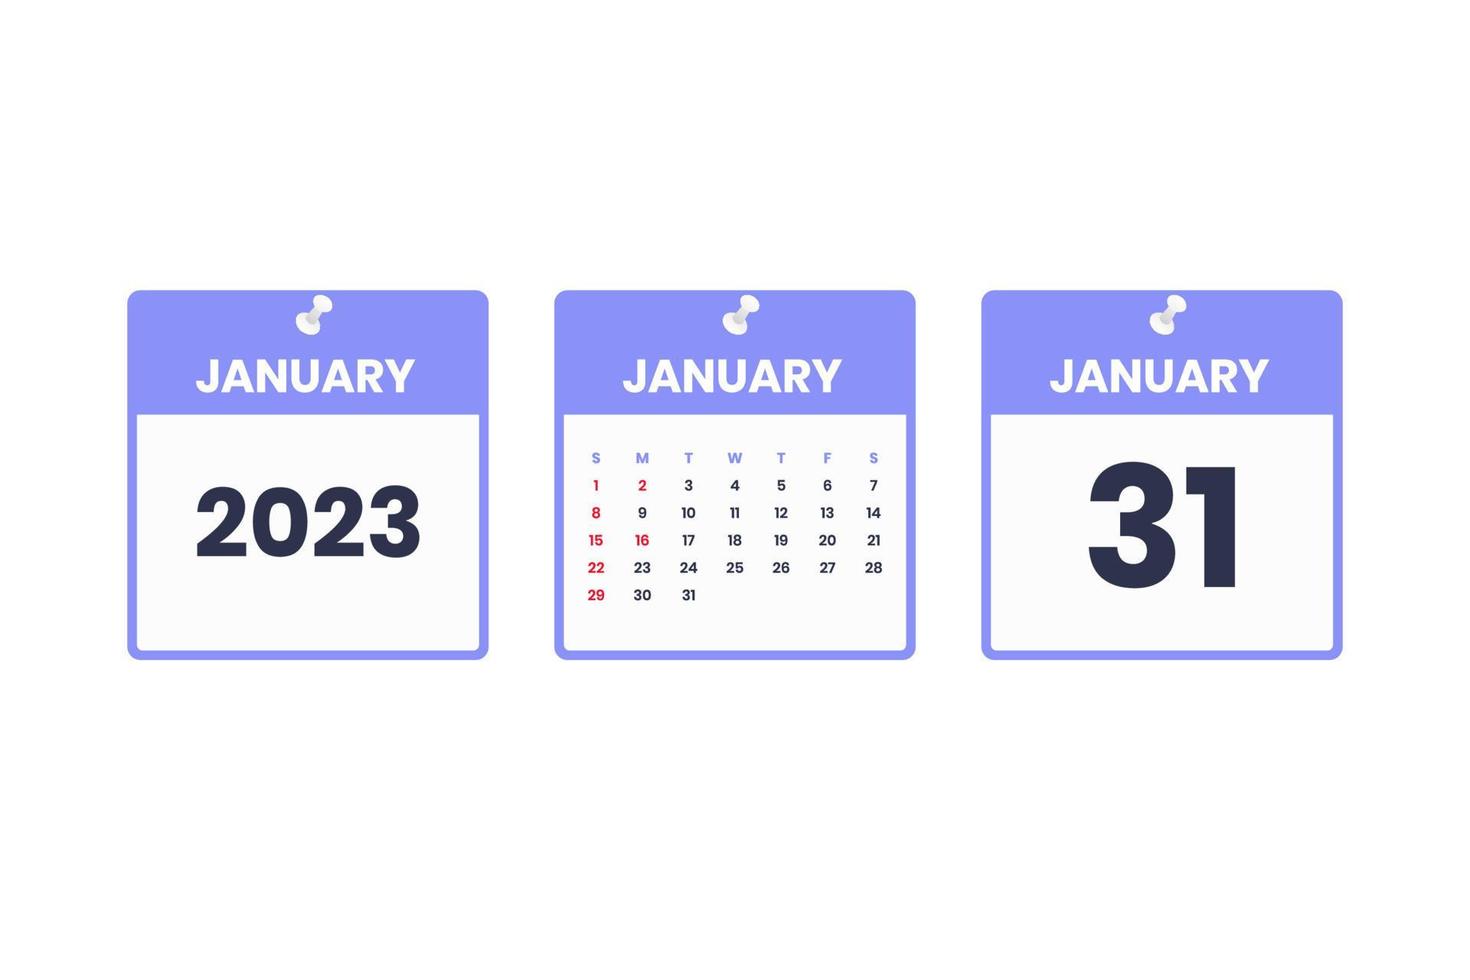 January calendar design. January 31 2023 calendar icon for schedule, appointment, important date concept vector